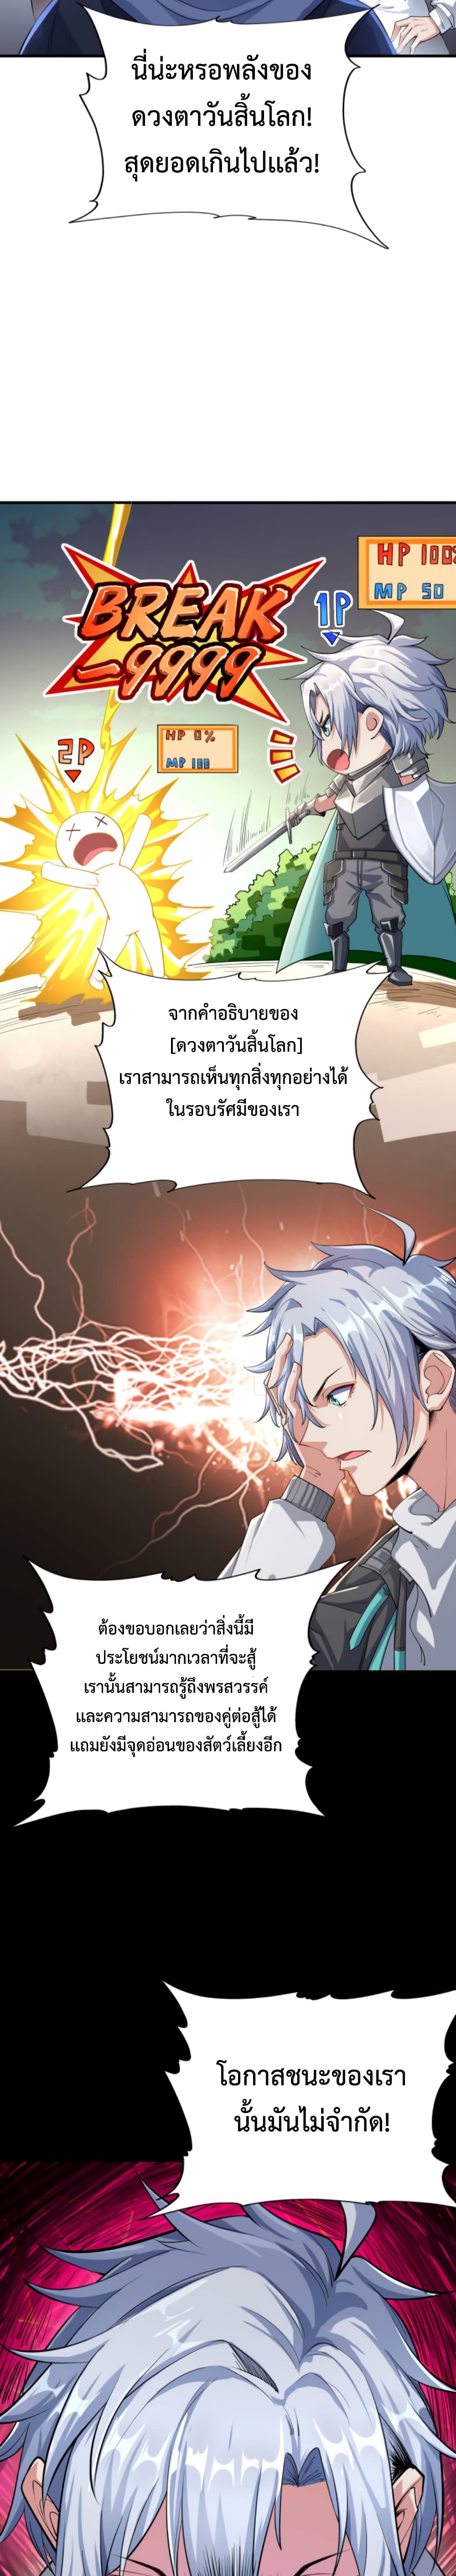 Reborn To Tamer World With Mythical Talents ตอนที่ 3 (6)